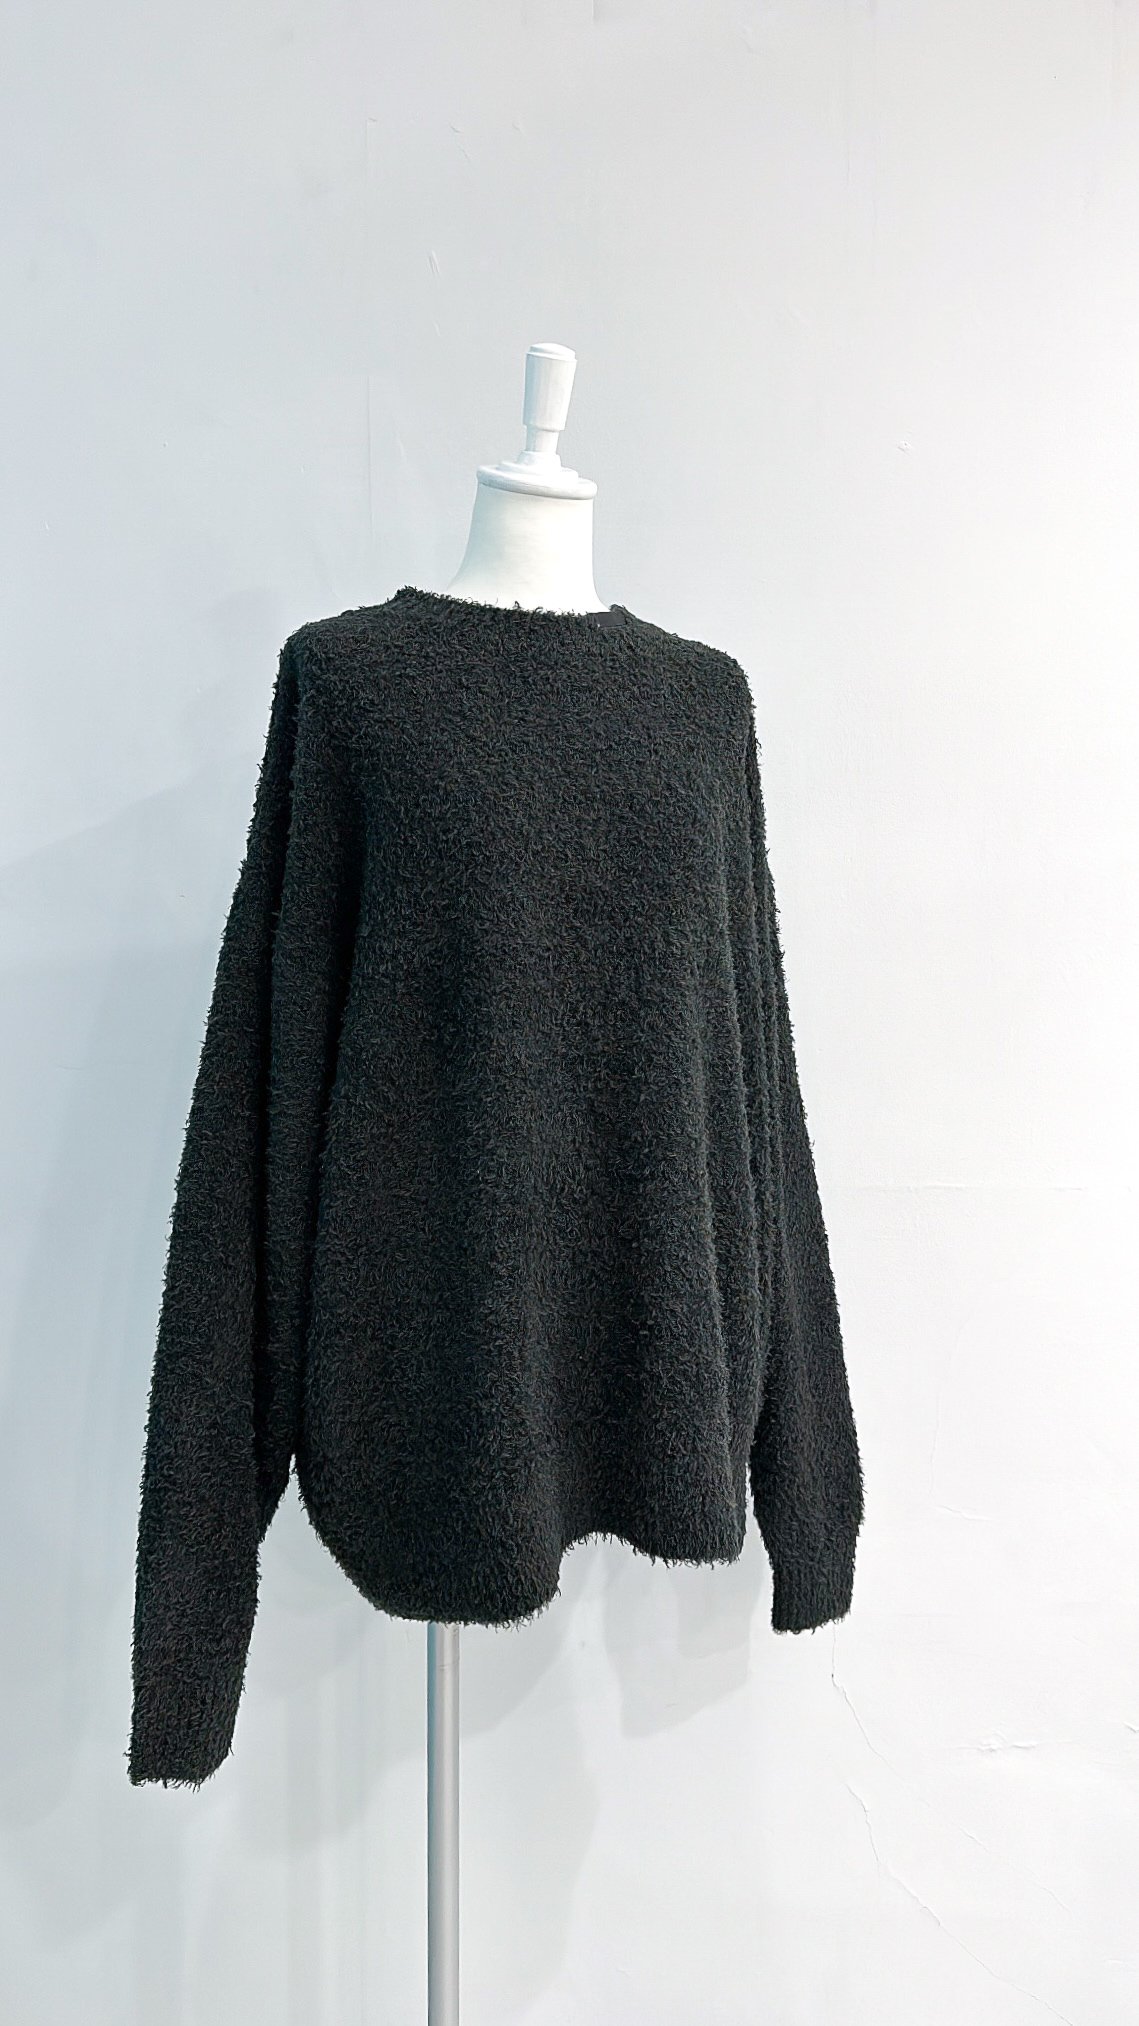 Cotton Shaggy : Pullover knit